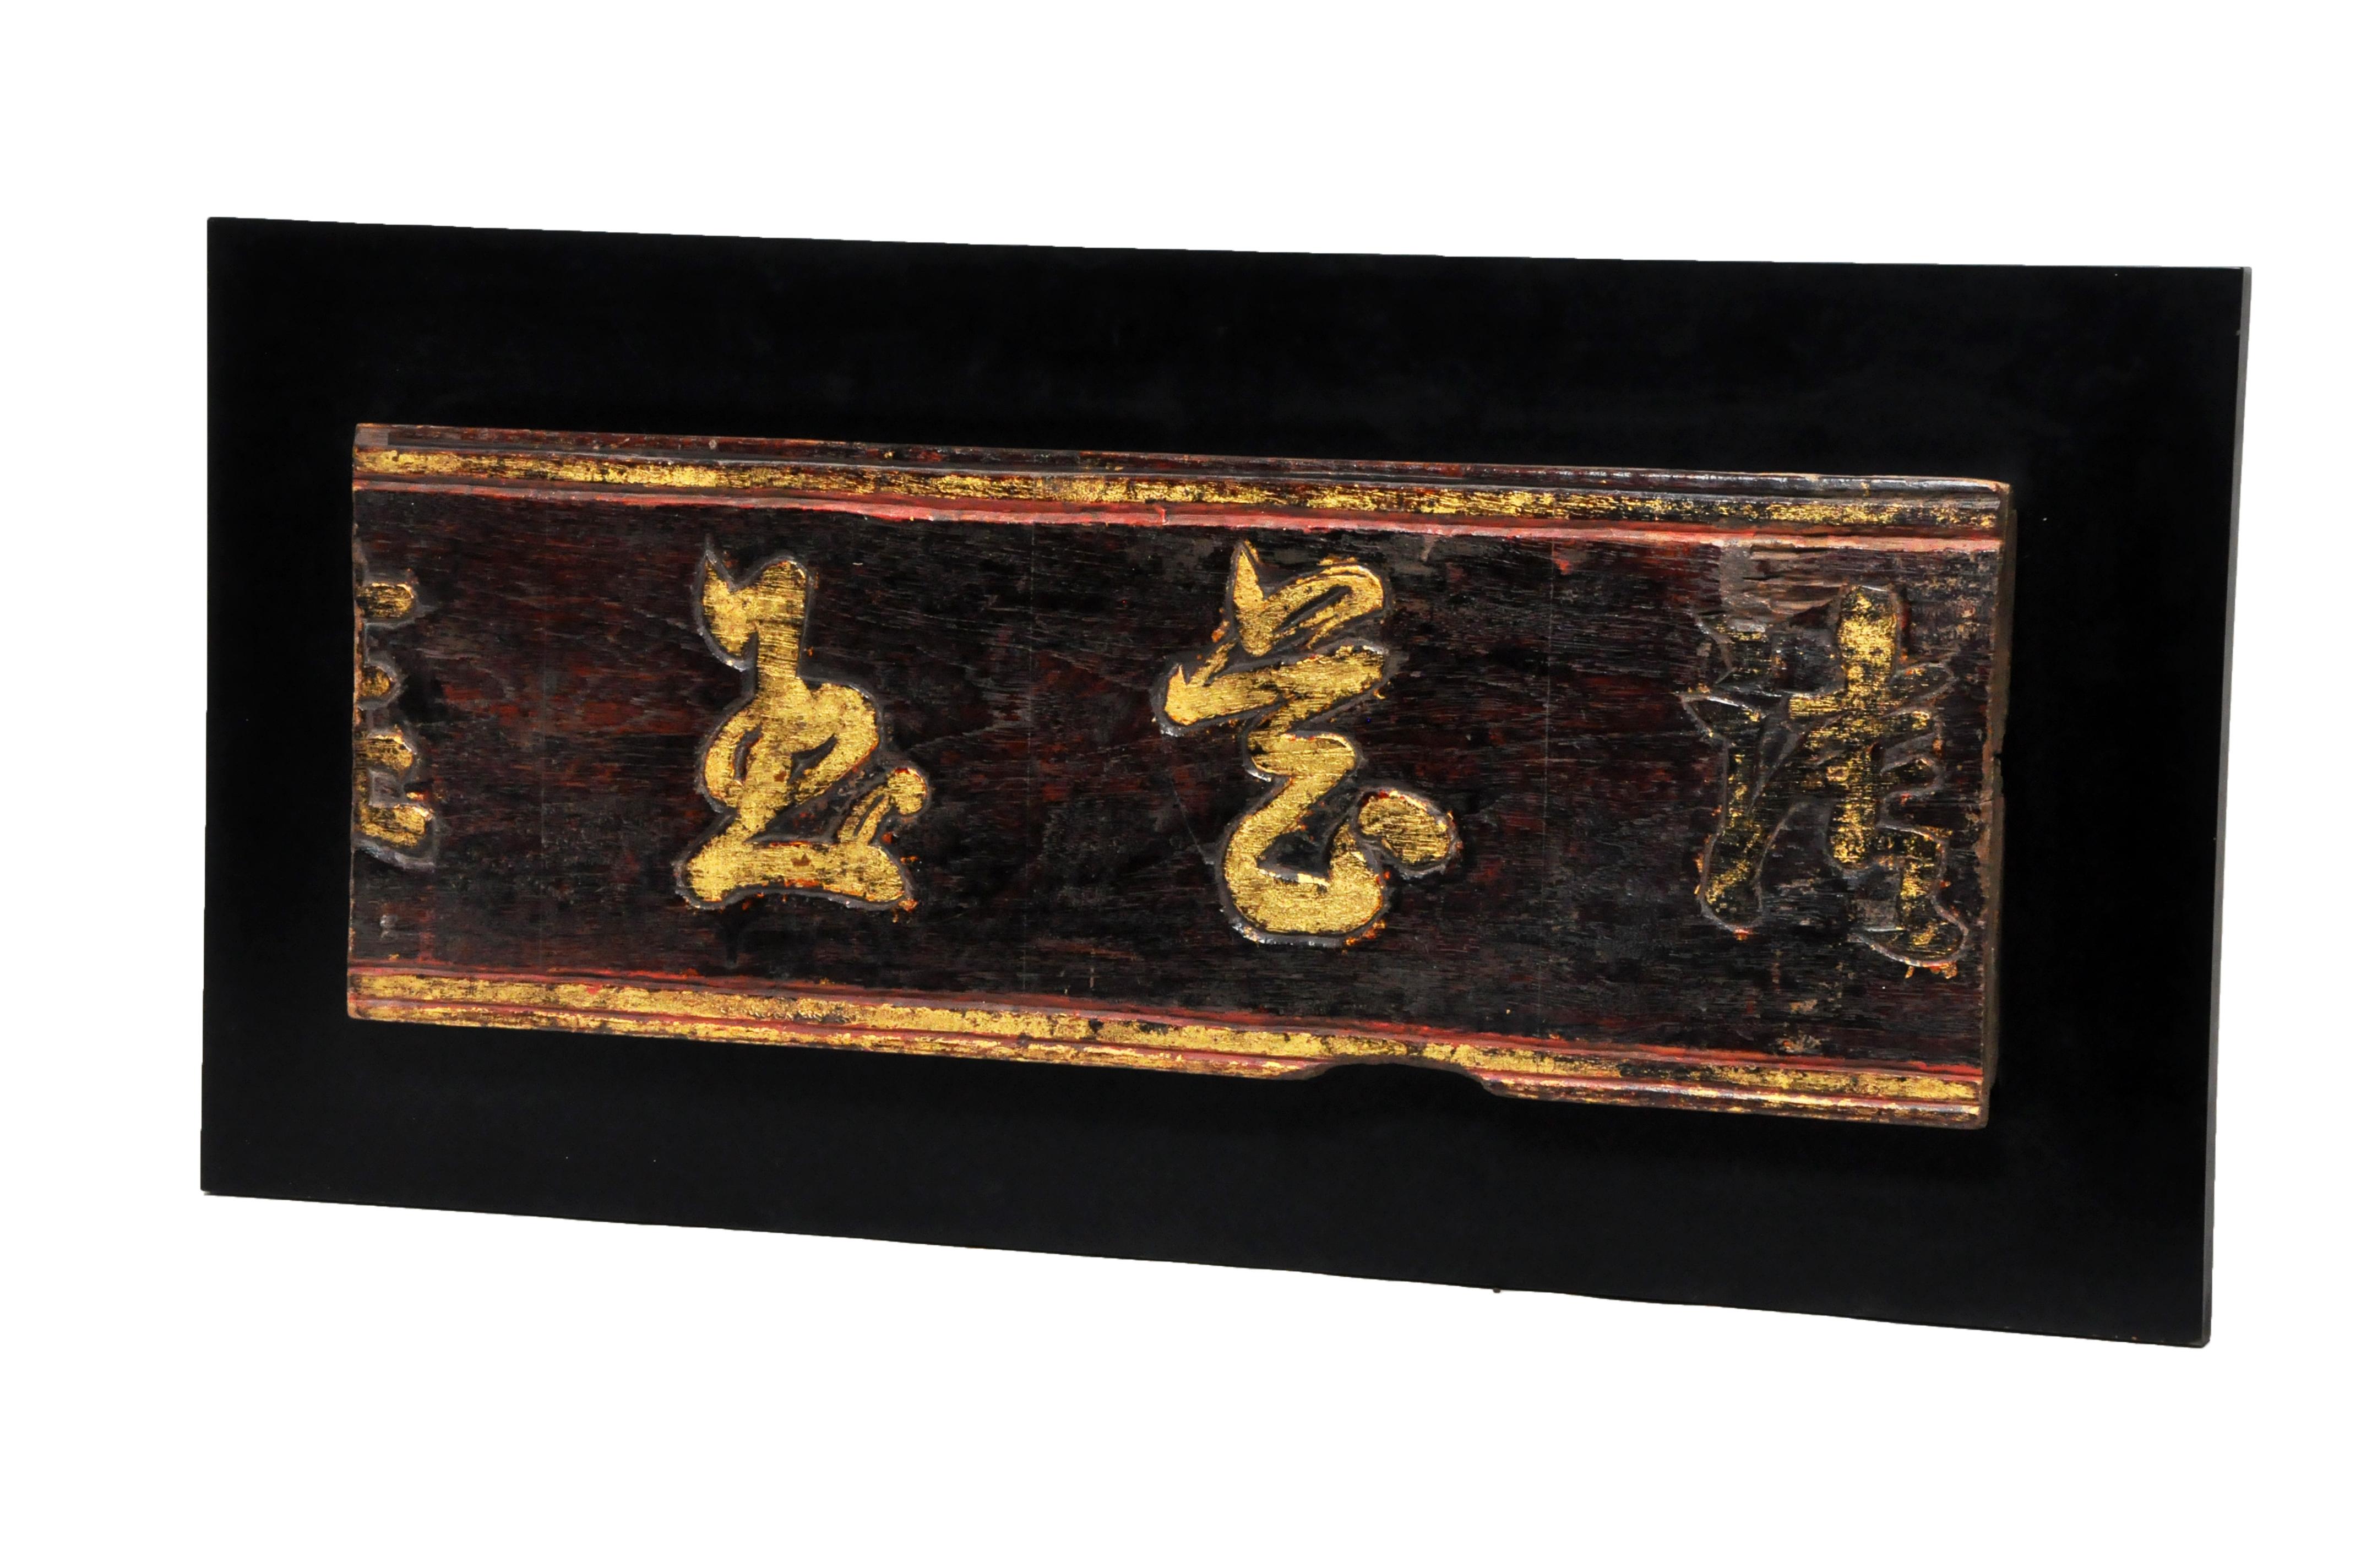 The sign is of Burmese origin, made from teakwood and covered in lacquer and gold leaf. The two legible characters are “Jade” and “Art”. As many carved signs were shop signs, this may have been a jade dealer’s sign. The piece is estimated to be